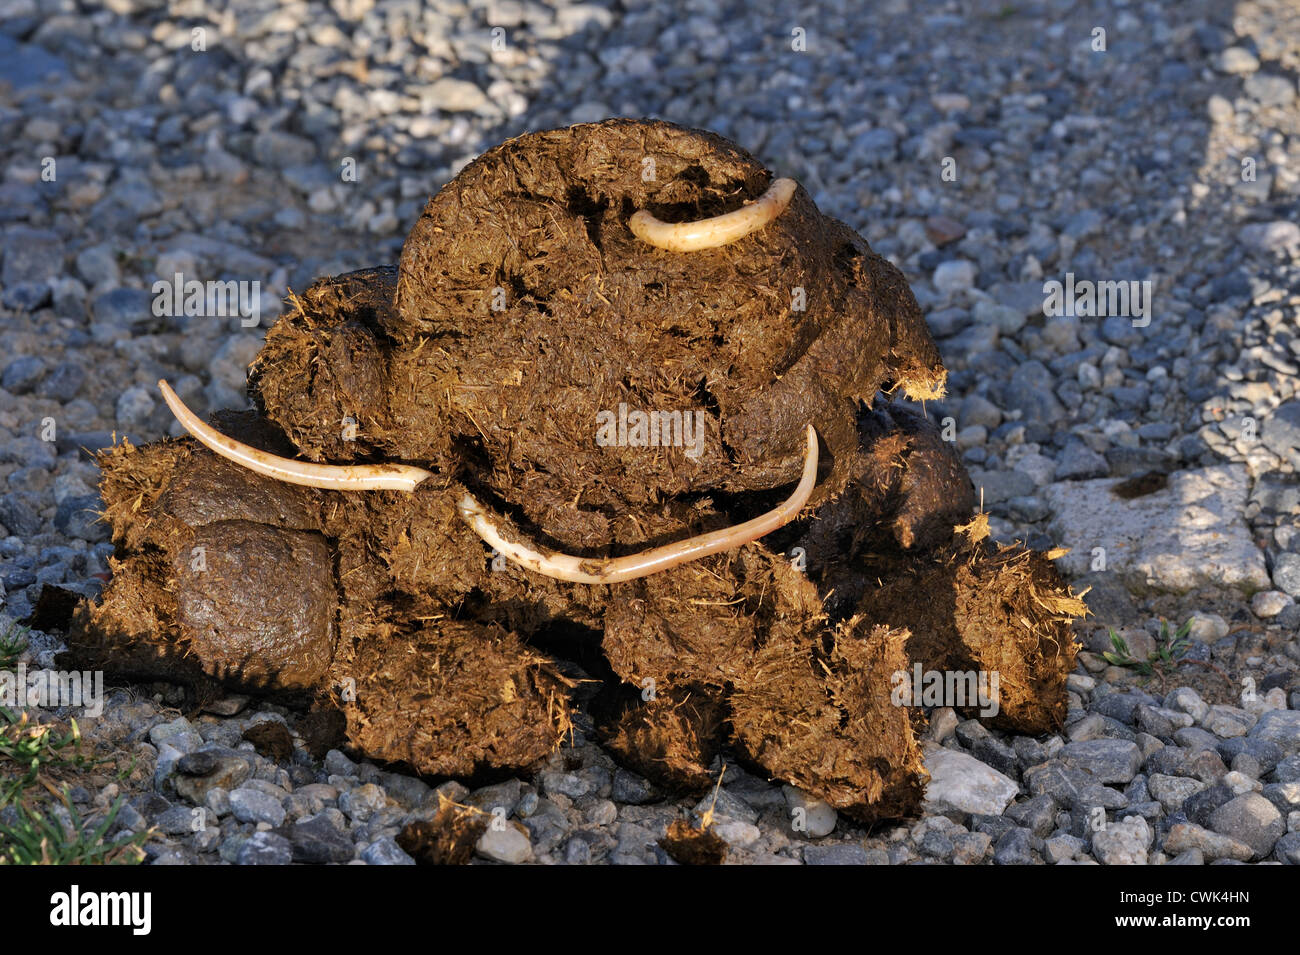 Horse roundworm / Equine roundworms (Parascaris equorum), parasite worms in horse dung / manure Stock Photo